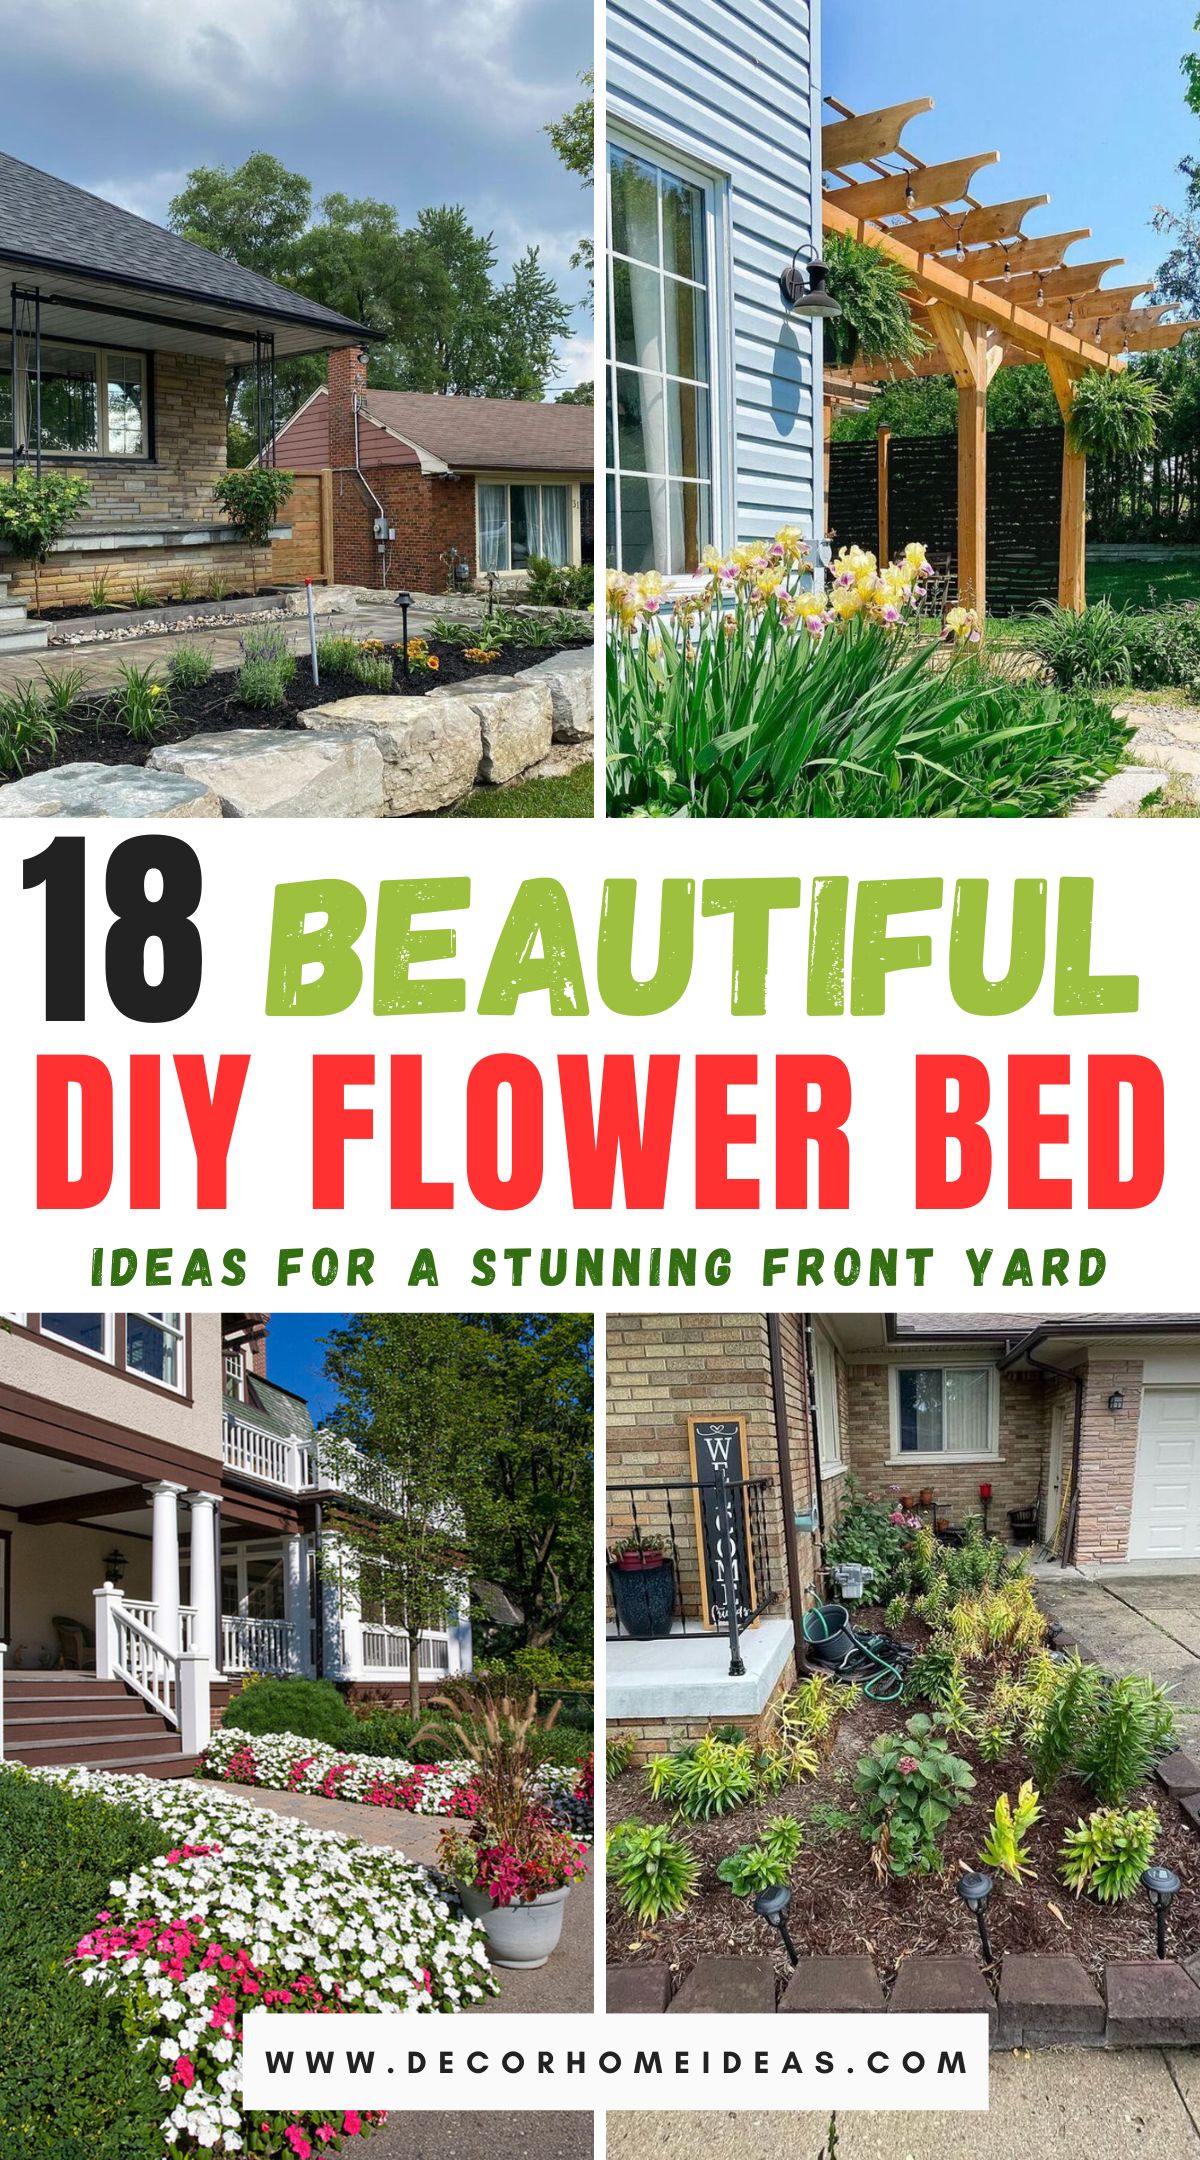 Transform your front yard with these 18 creative DIY flower bed ideas. From vibrant arrangements to ingenious designs, discover inspiration to elevate your outdoor space, adding beauty and charm to your home's curb appeal.